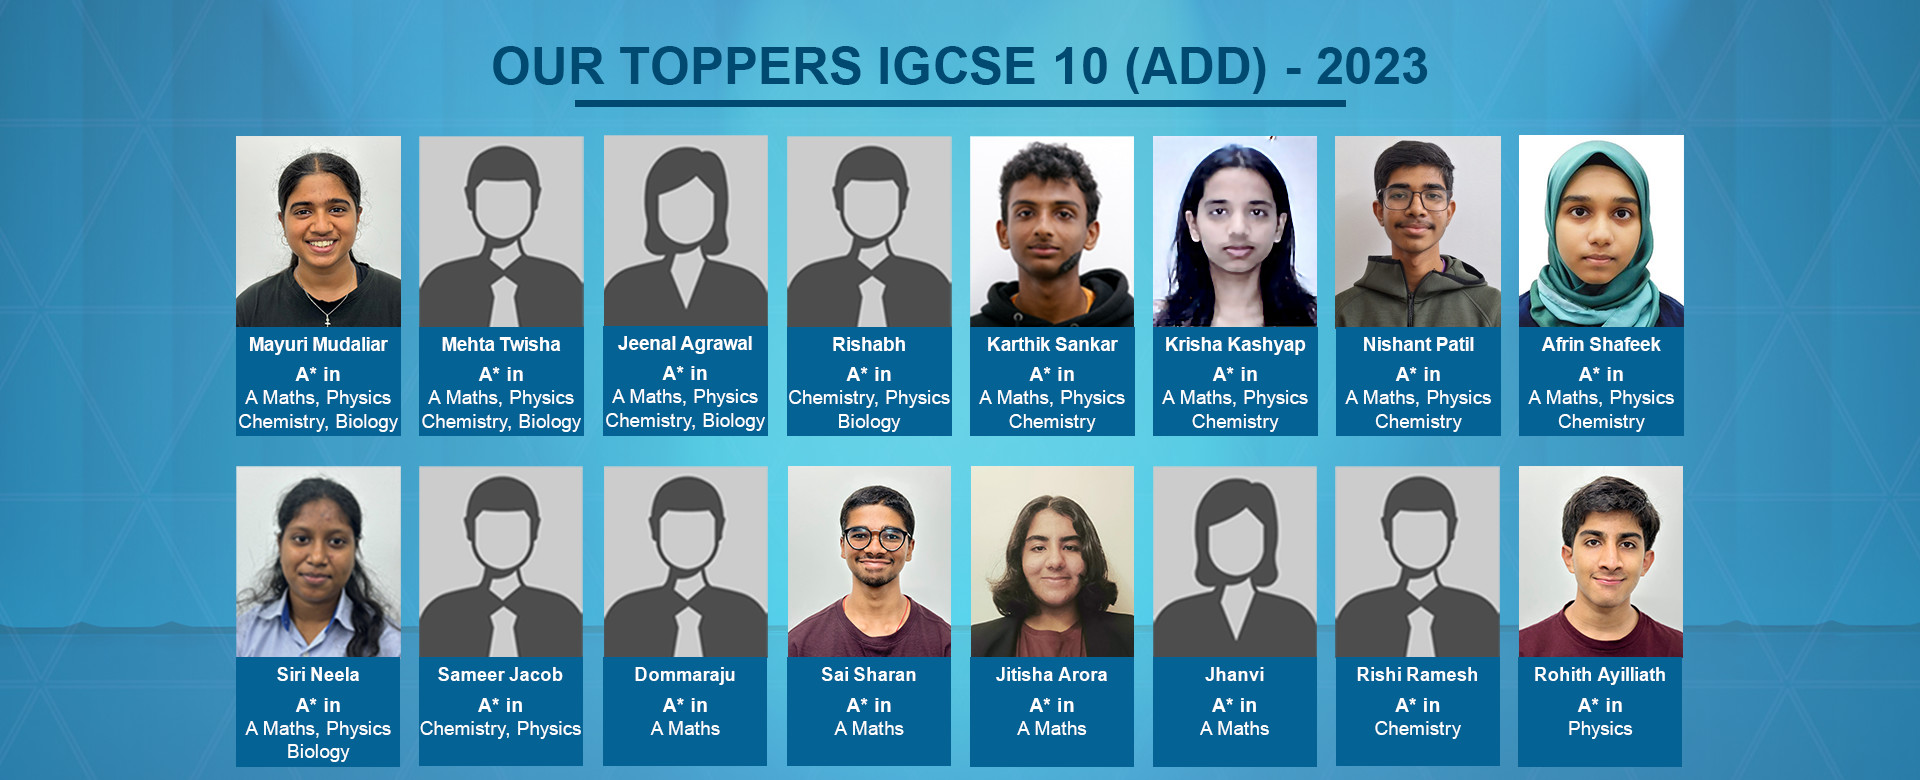 Our IGCSE 10 A-Maths Toppers - 2023